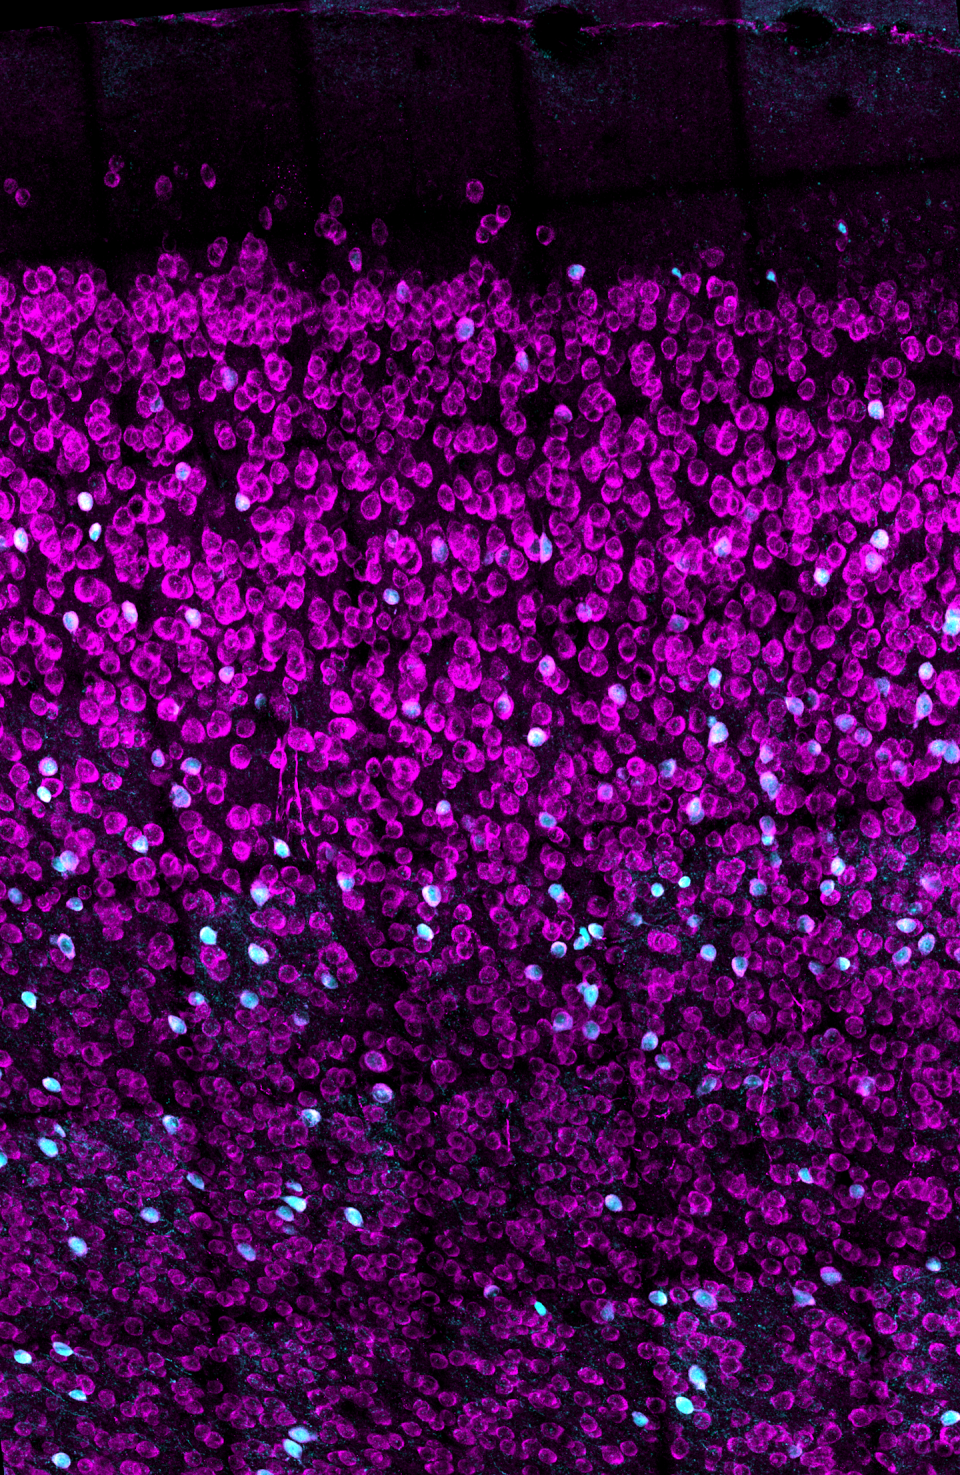 Image of hormone receptors in the prefrontal cortex of the brain, illuminated in different colors.